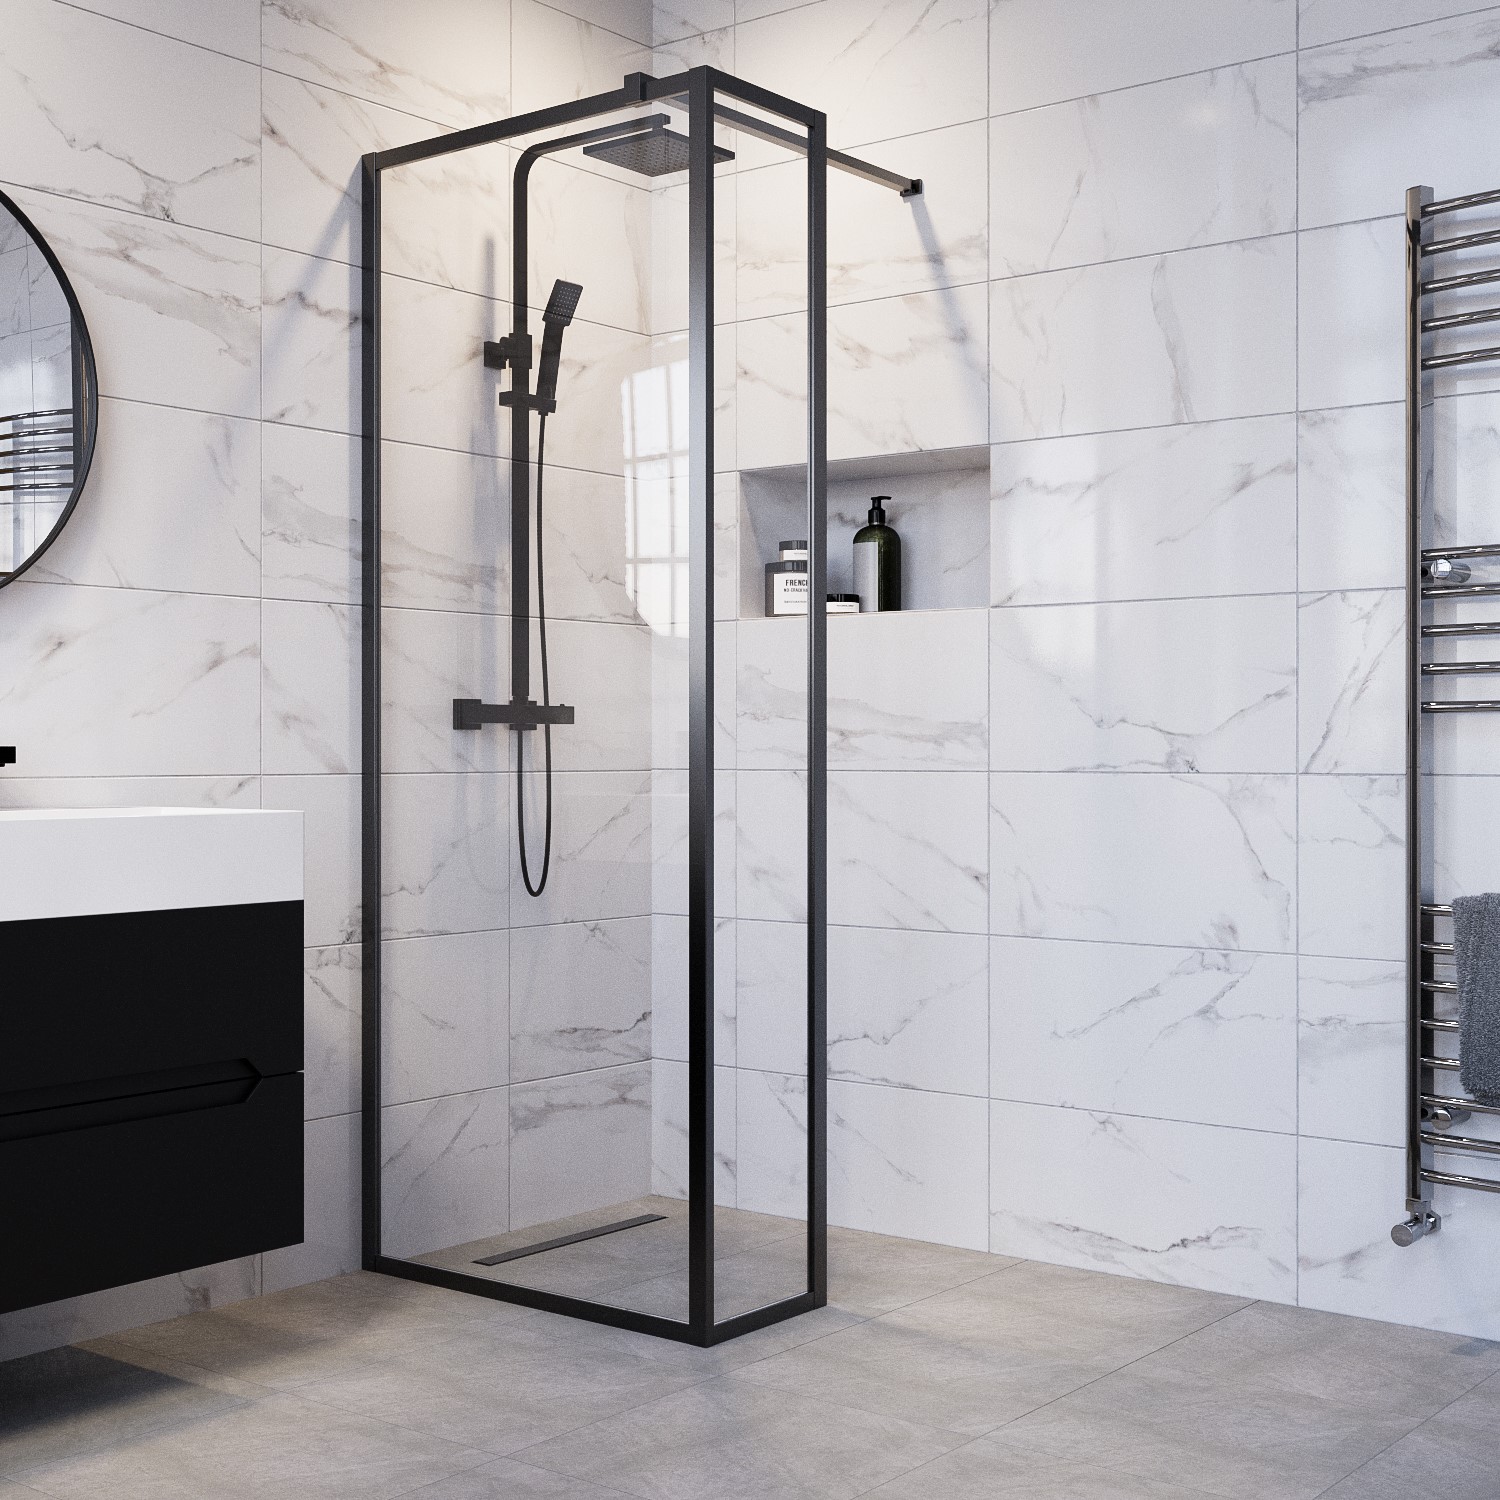 Black 800mm Framed Wet Room Shower Screen with Wall Support Bar & Return Panel - Zolla